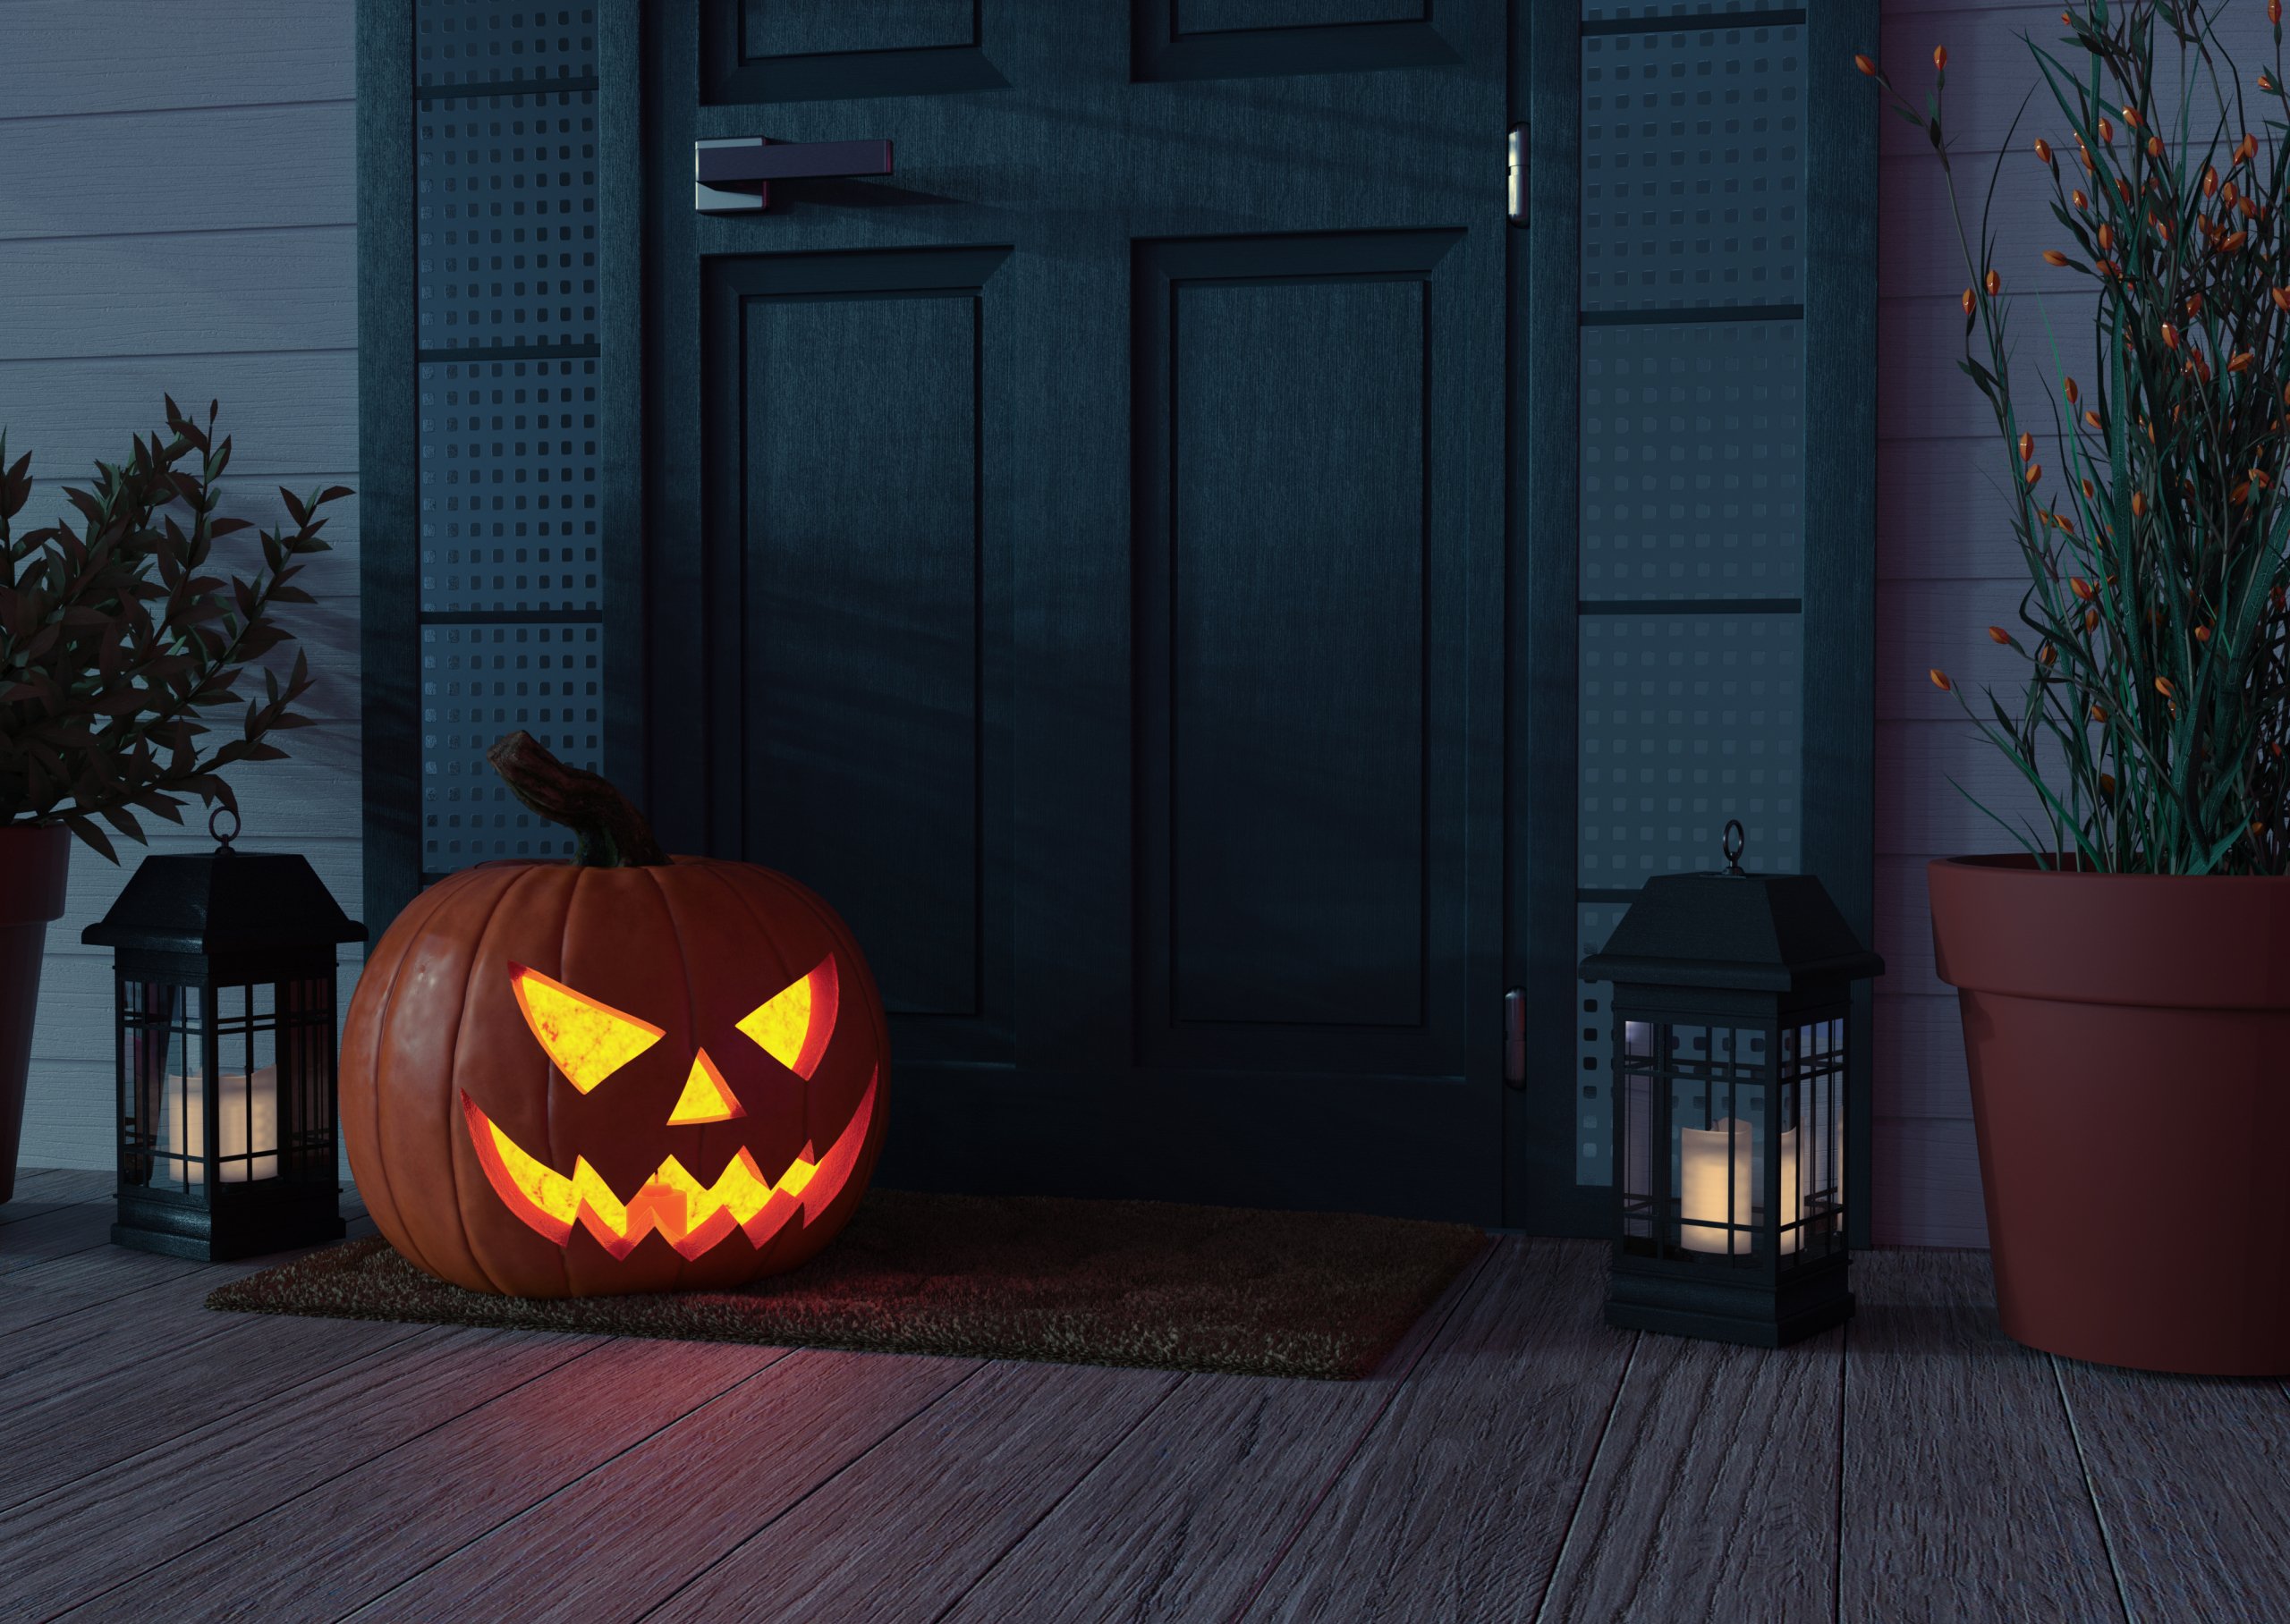 The home of a front porch decorated with a carved pumpkin and lanterns.